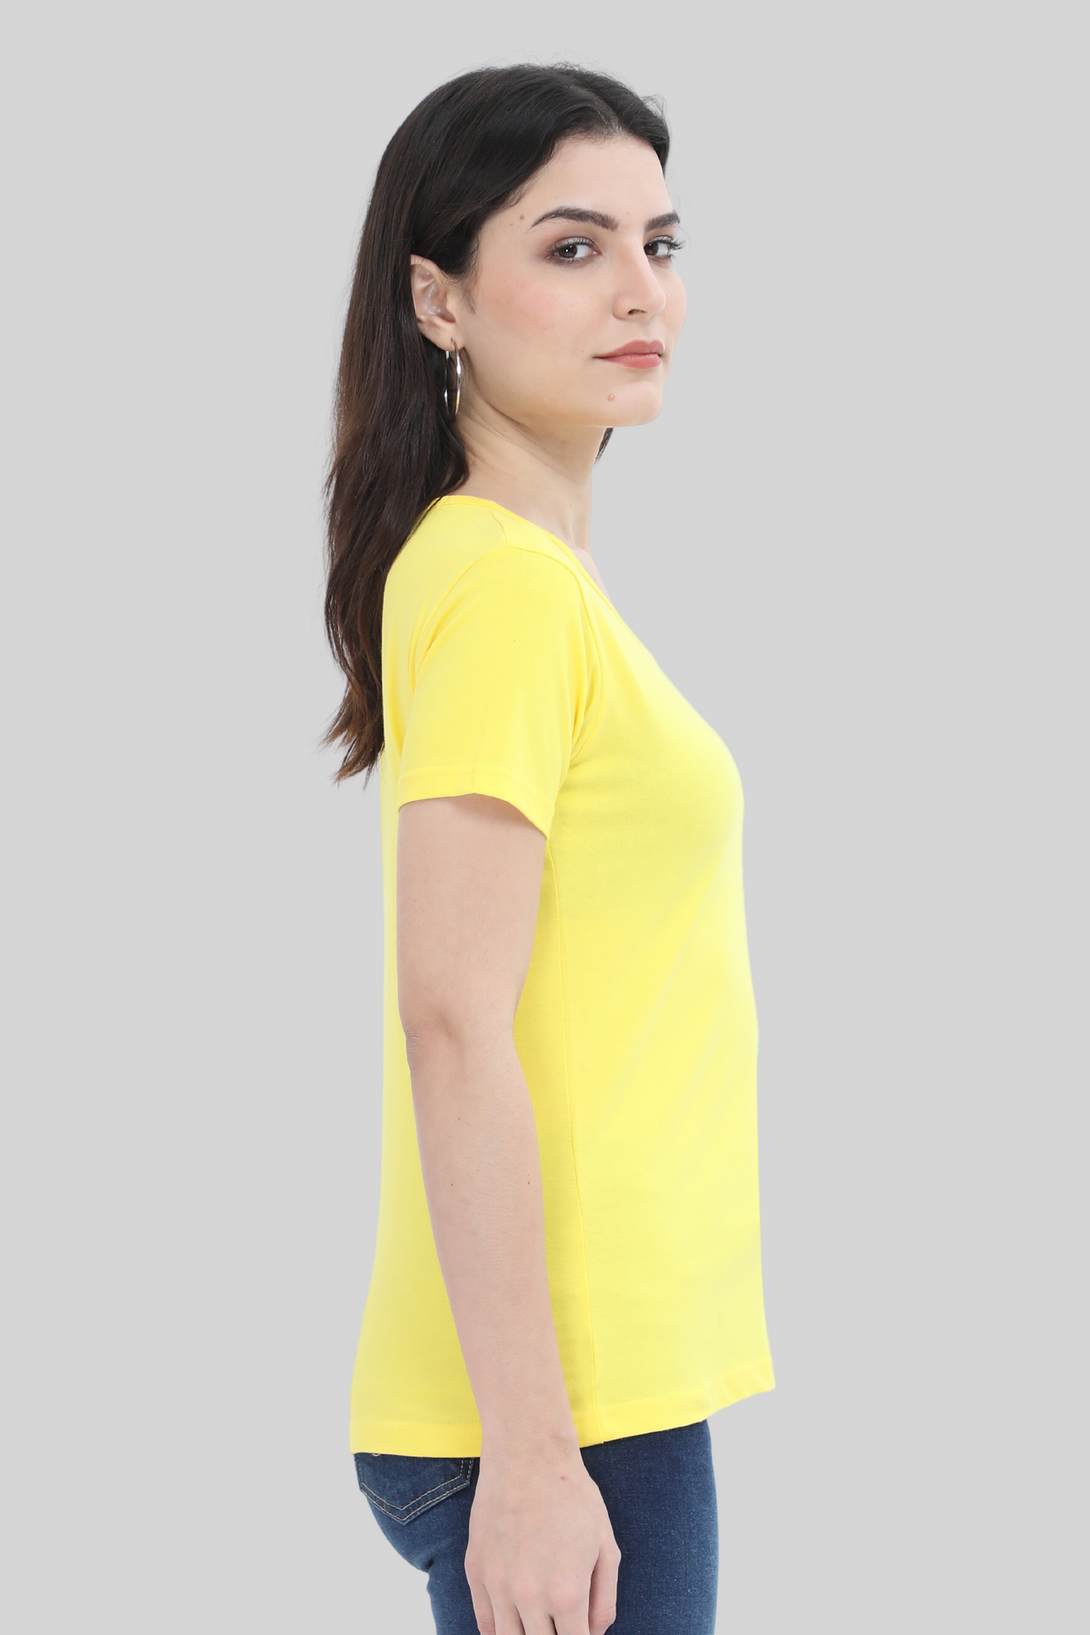 Bright Yellow Scoop Neck T-Shirt For Women - WowWaves